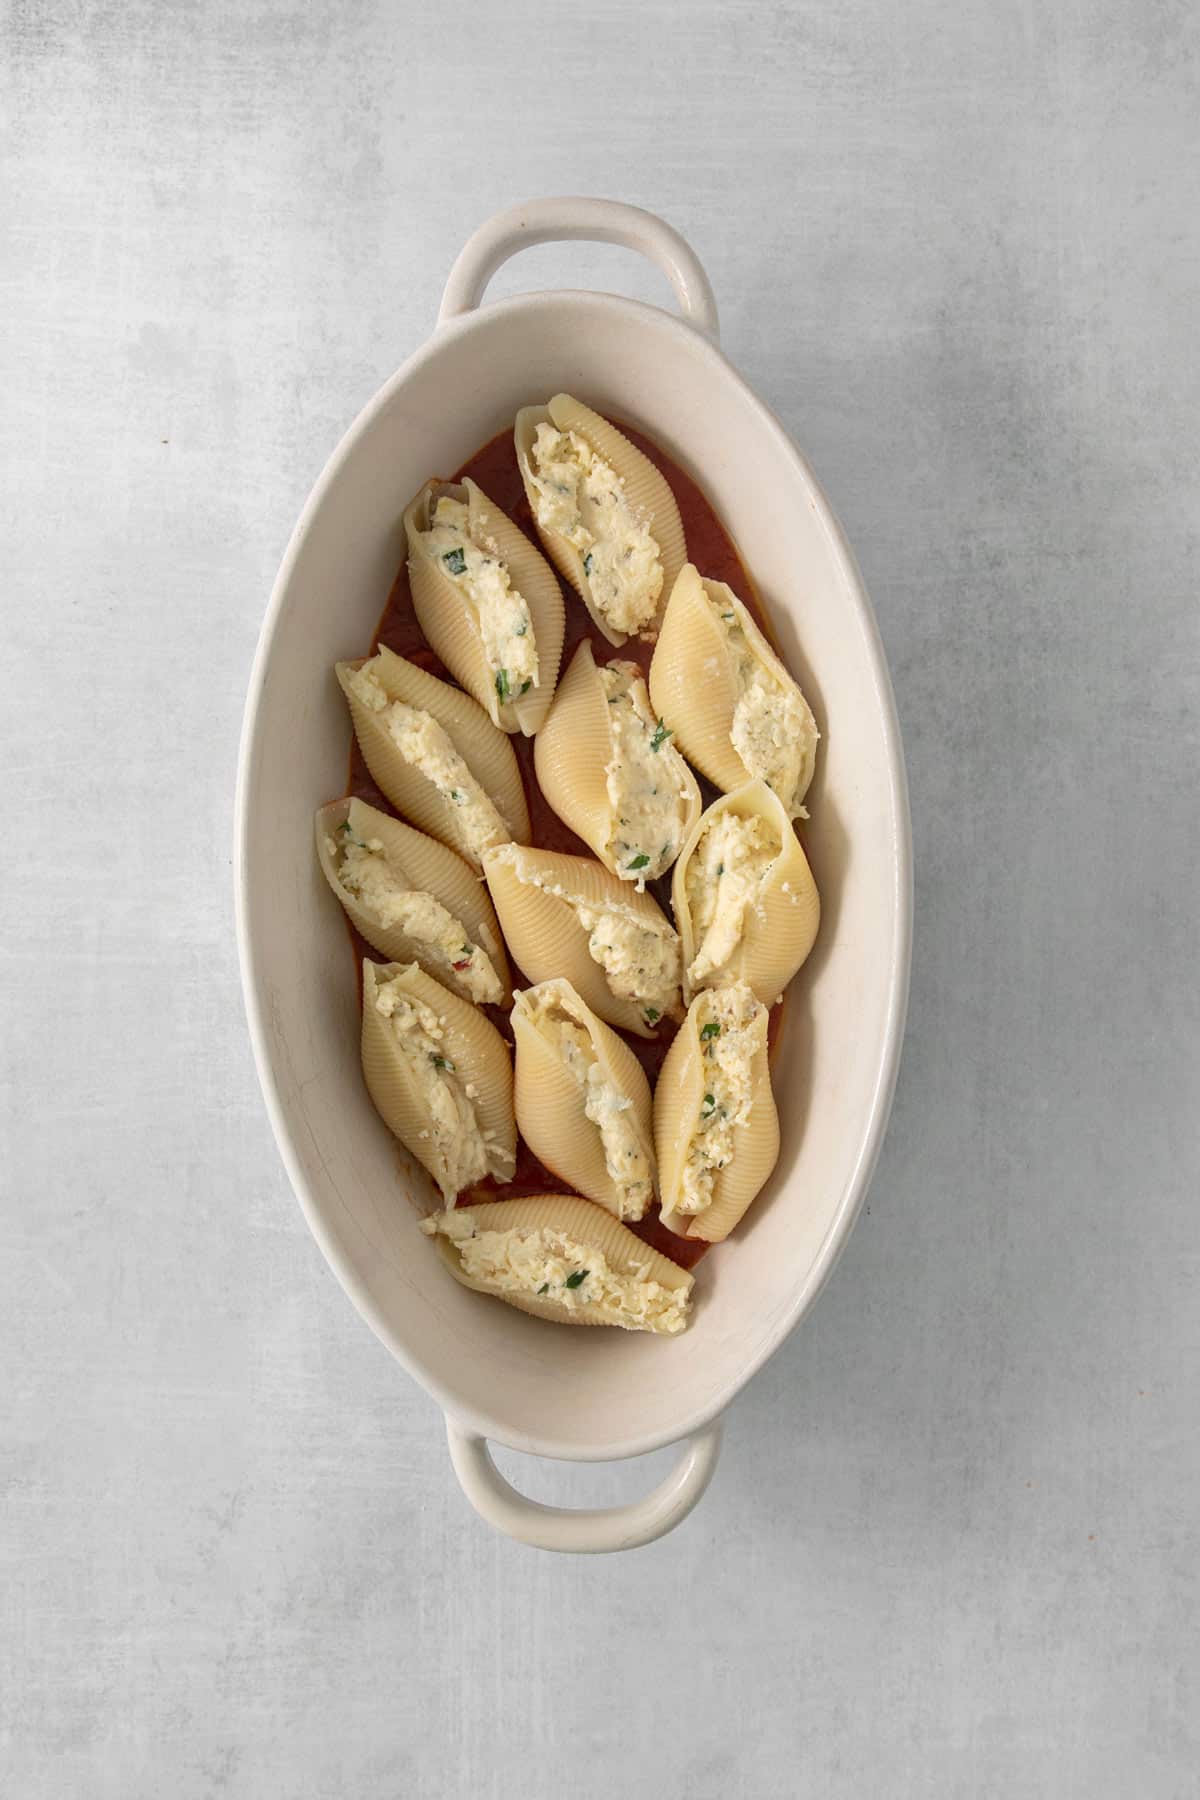 the stuffed shells placed in a baking dish.